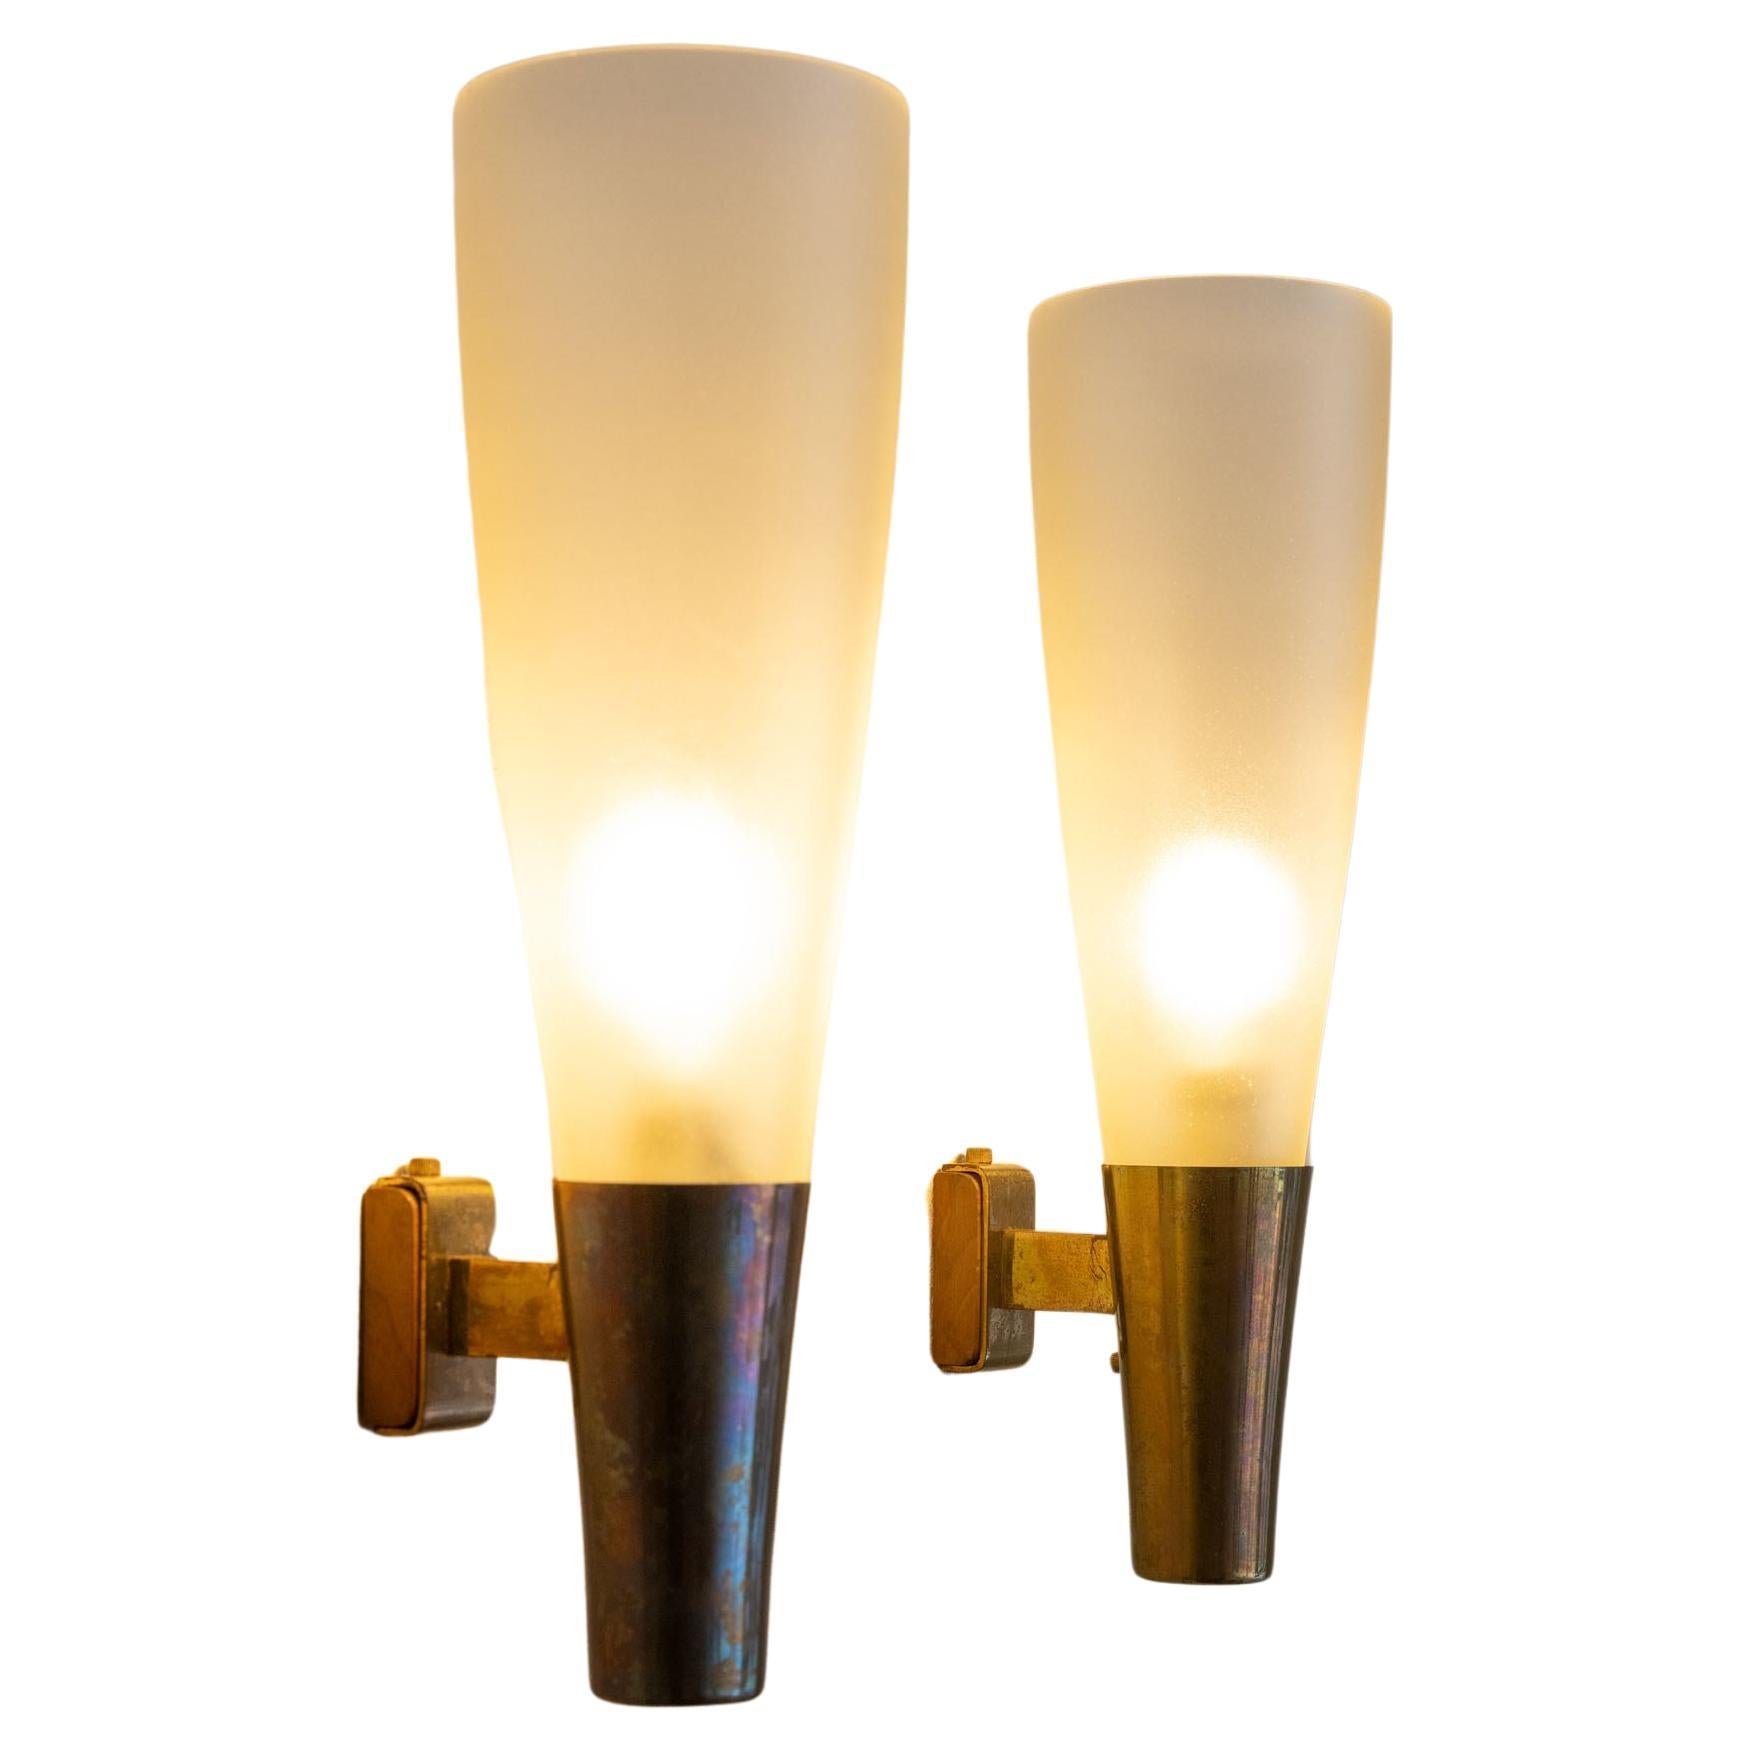 Midcentury pair of wall lights mod. 1537 by Pietro Chiesa for Fontana Arte